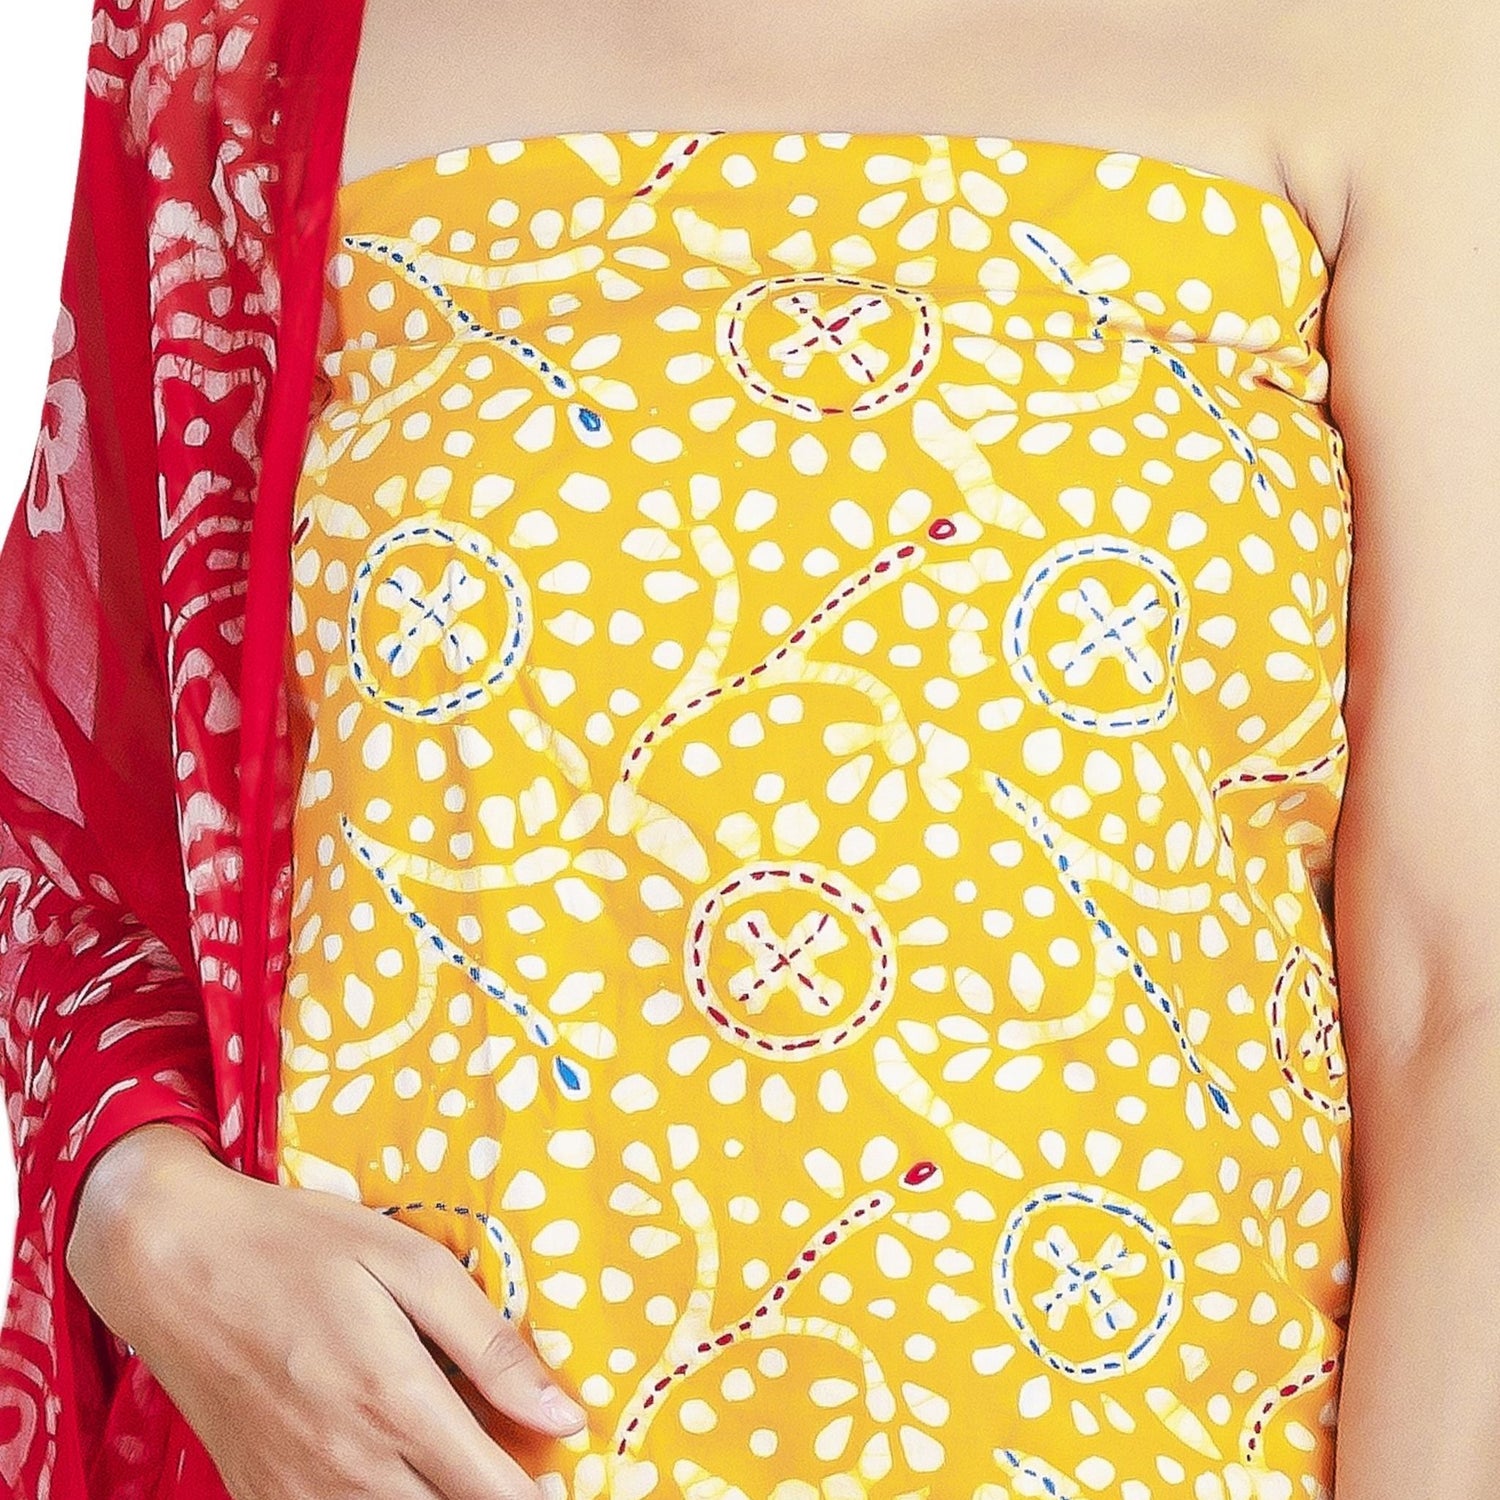 yellow cotton top with embroidery and white print , red bottom with white print, chiffon dupatta in red and yellow